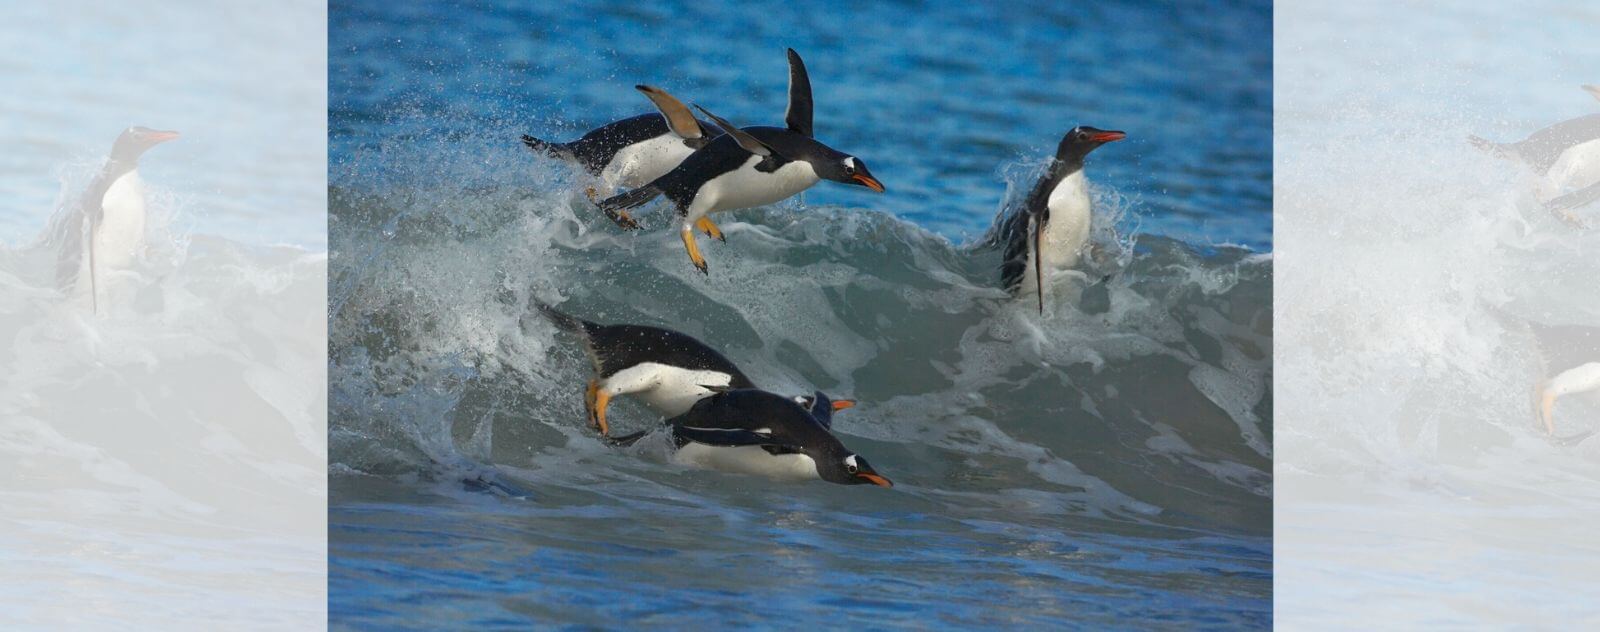 Penguin Swimming on a Wave